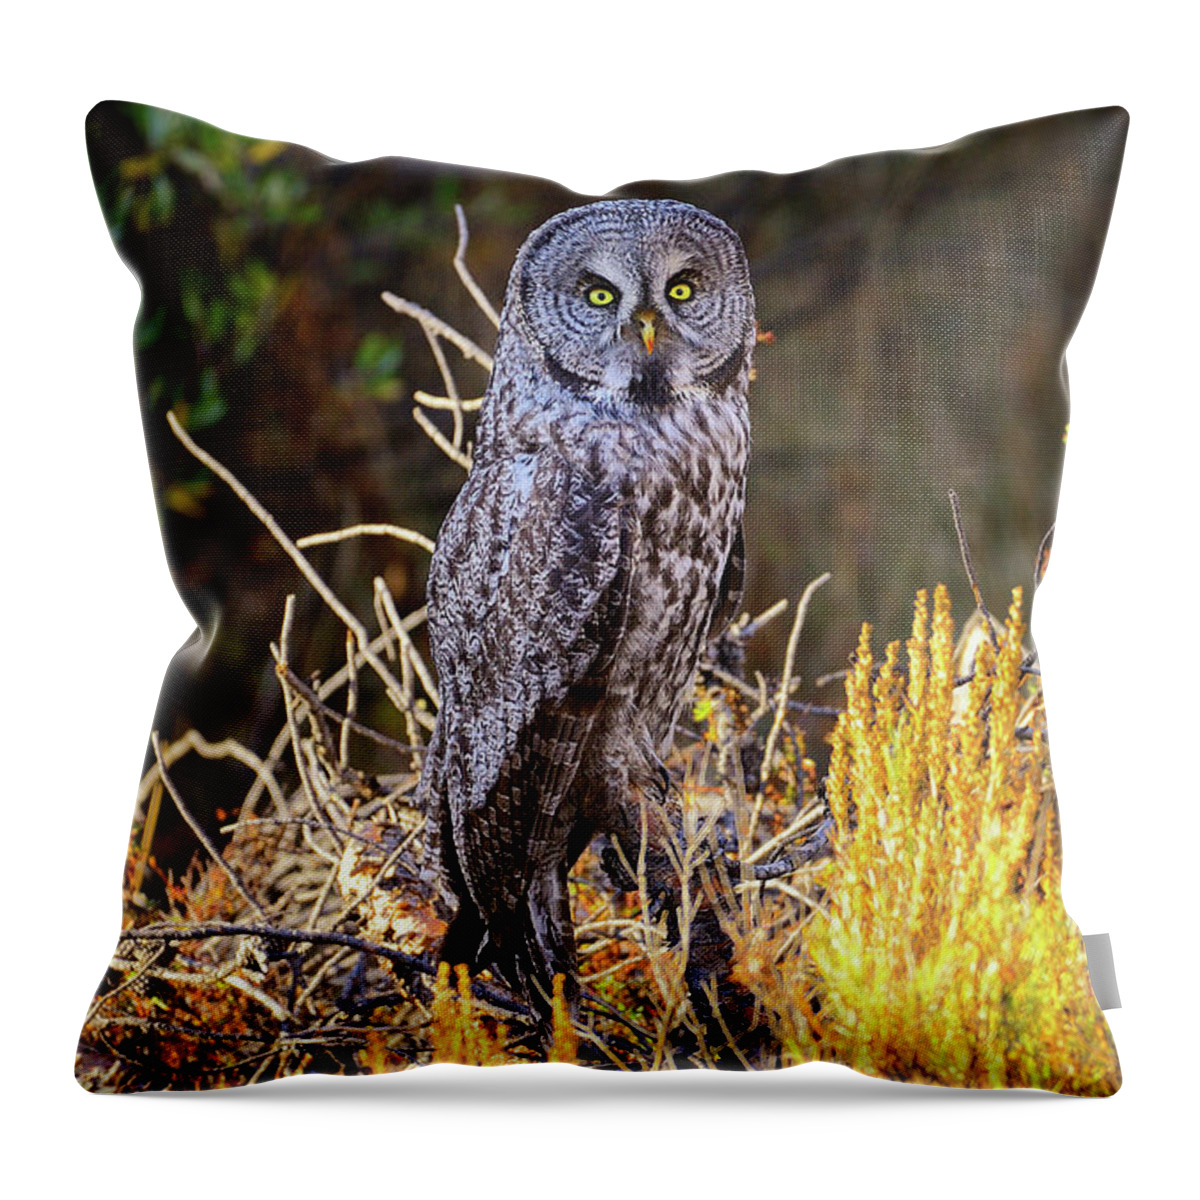 Great Grey Owl Throw Pillow featuring the photograph Great Grey Owl Portrait by Greg Norrell